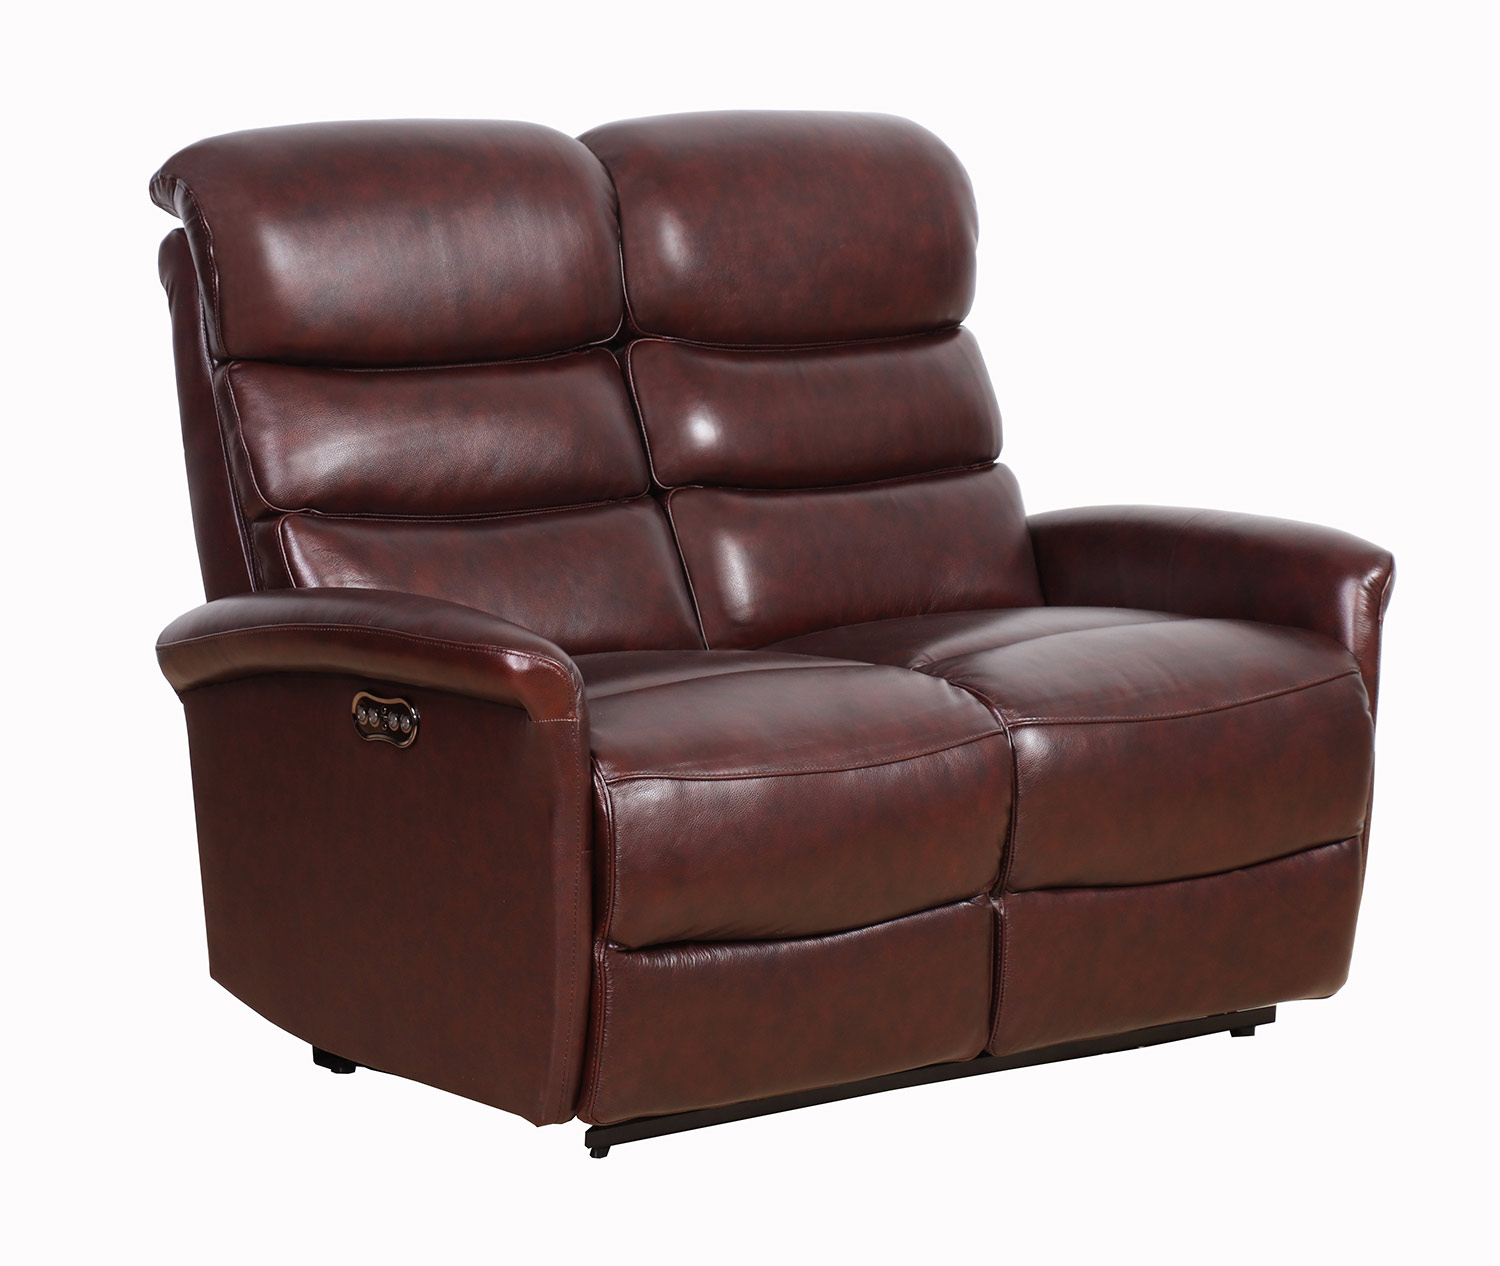 Barcalounger Kelso Power Reclining Loveseat with Power Head Rests - Ryegate Burgundy/Leather Match